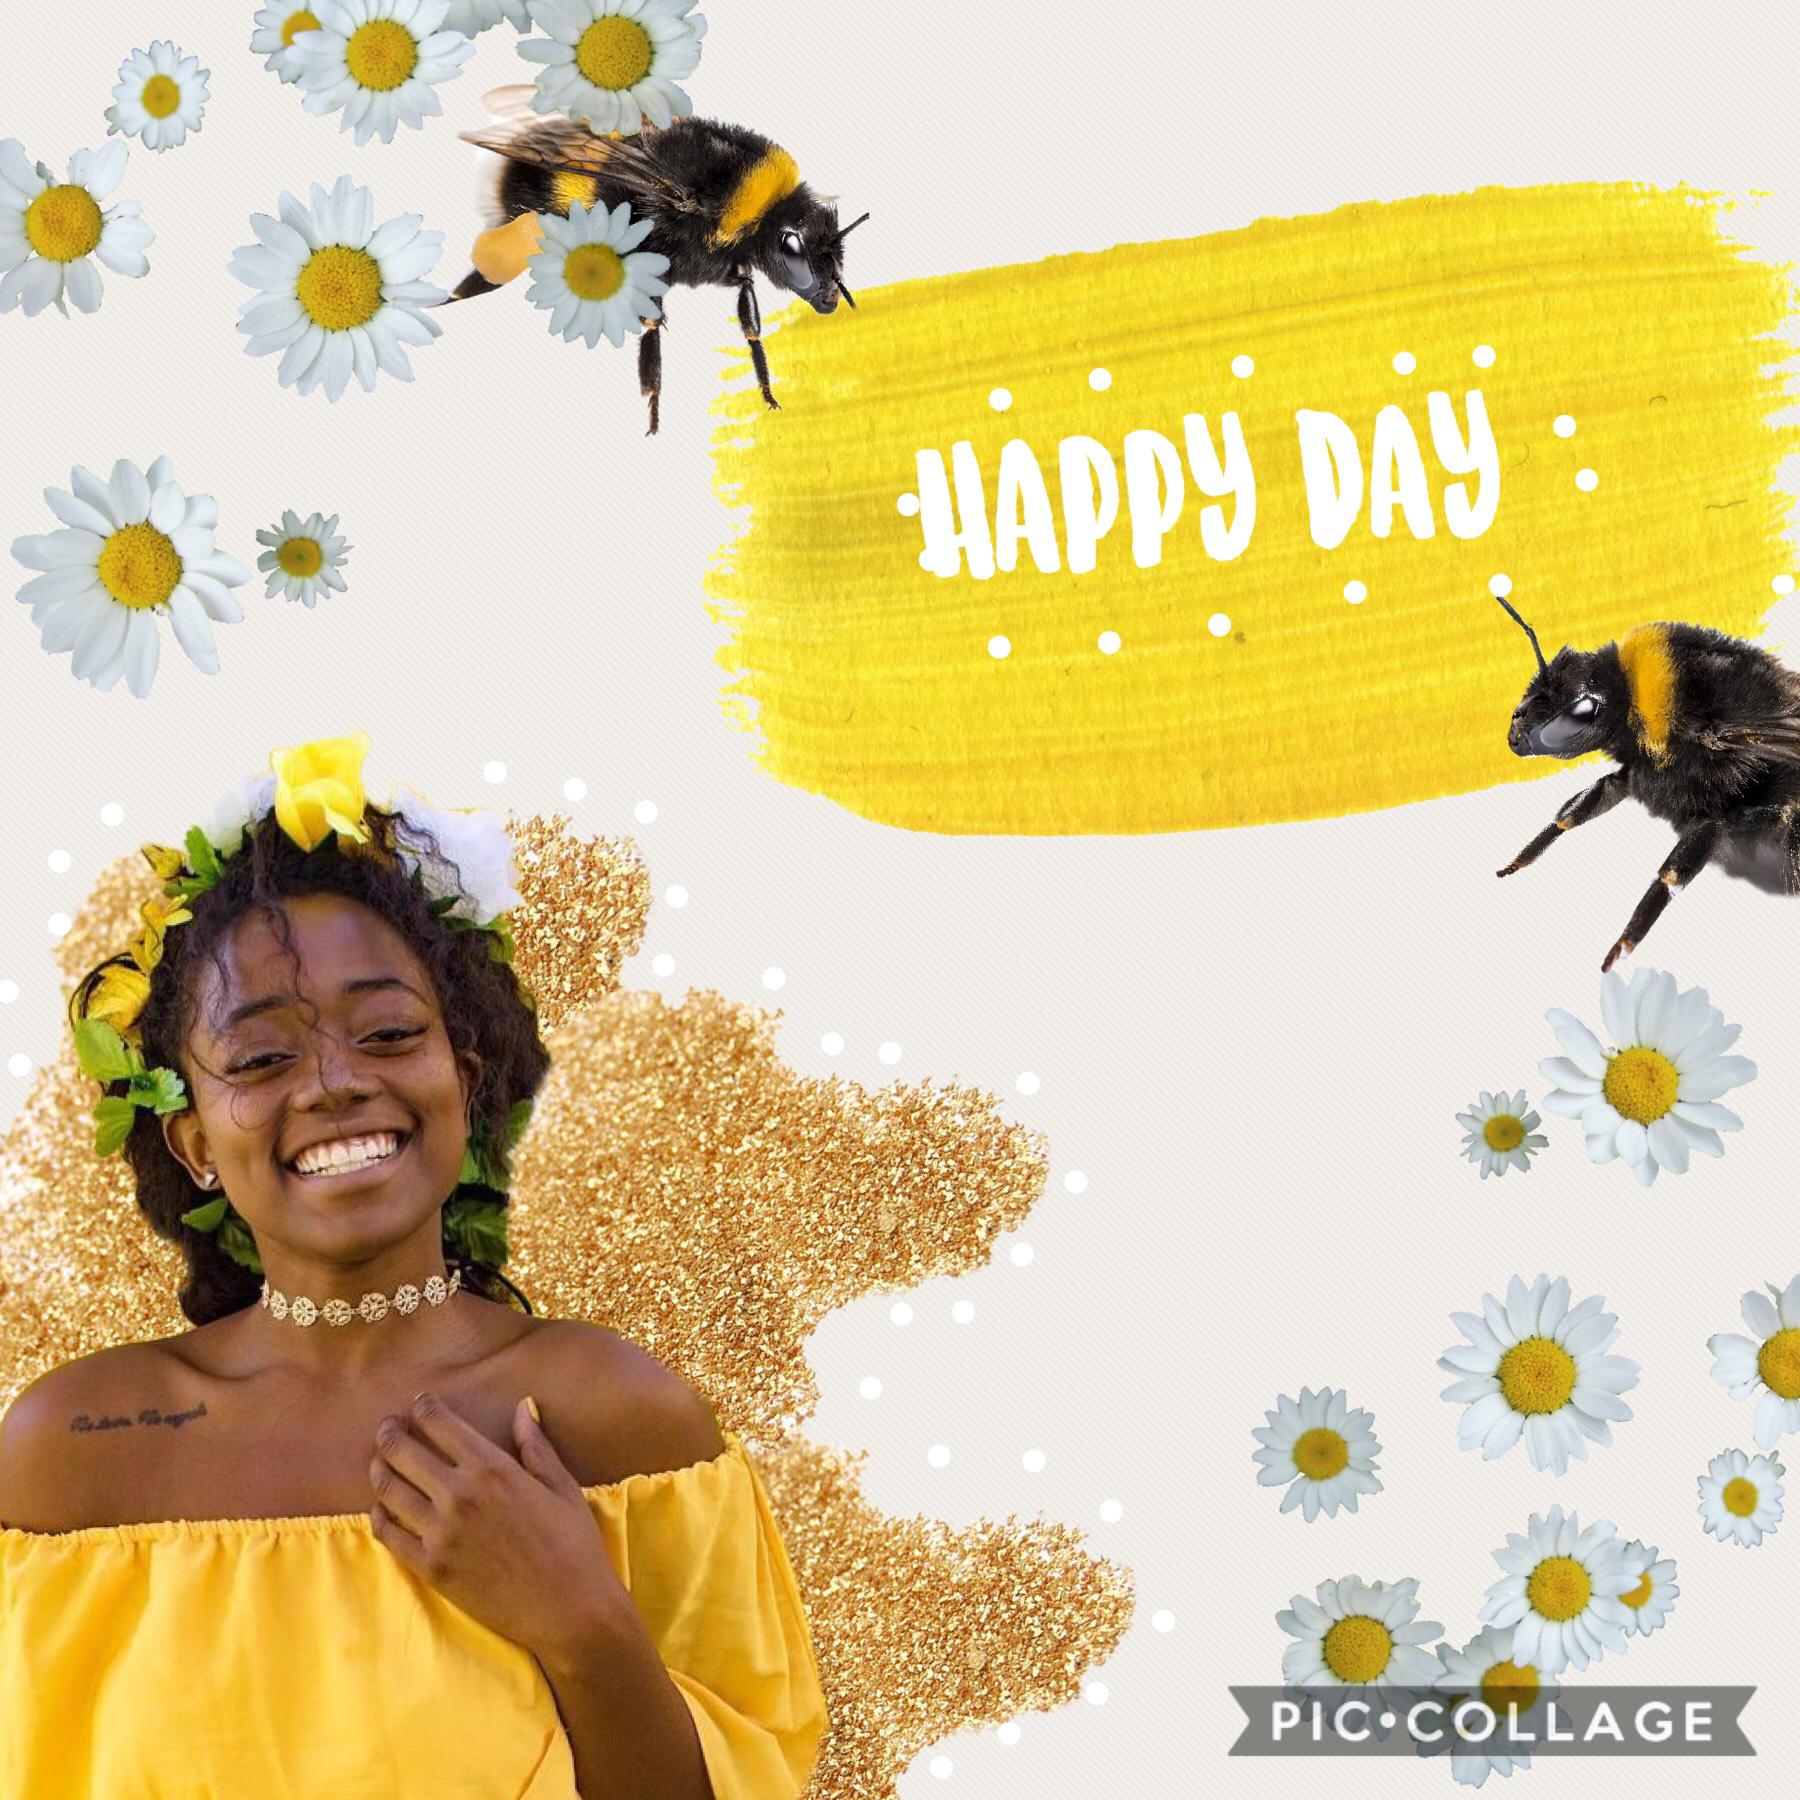 💛hApPy dAy 💛

Some more followers would make my day happy 😂 